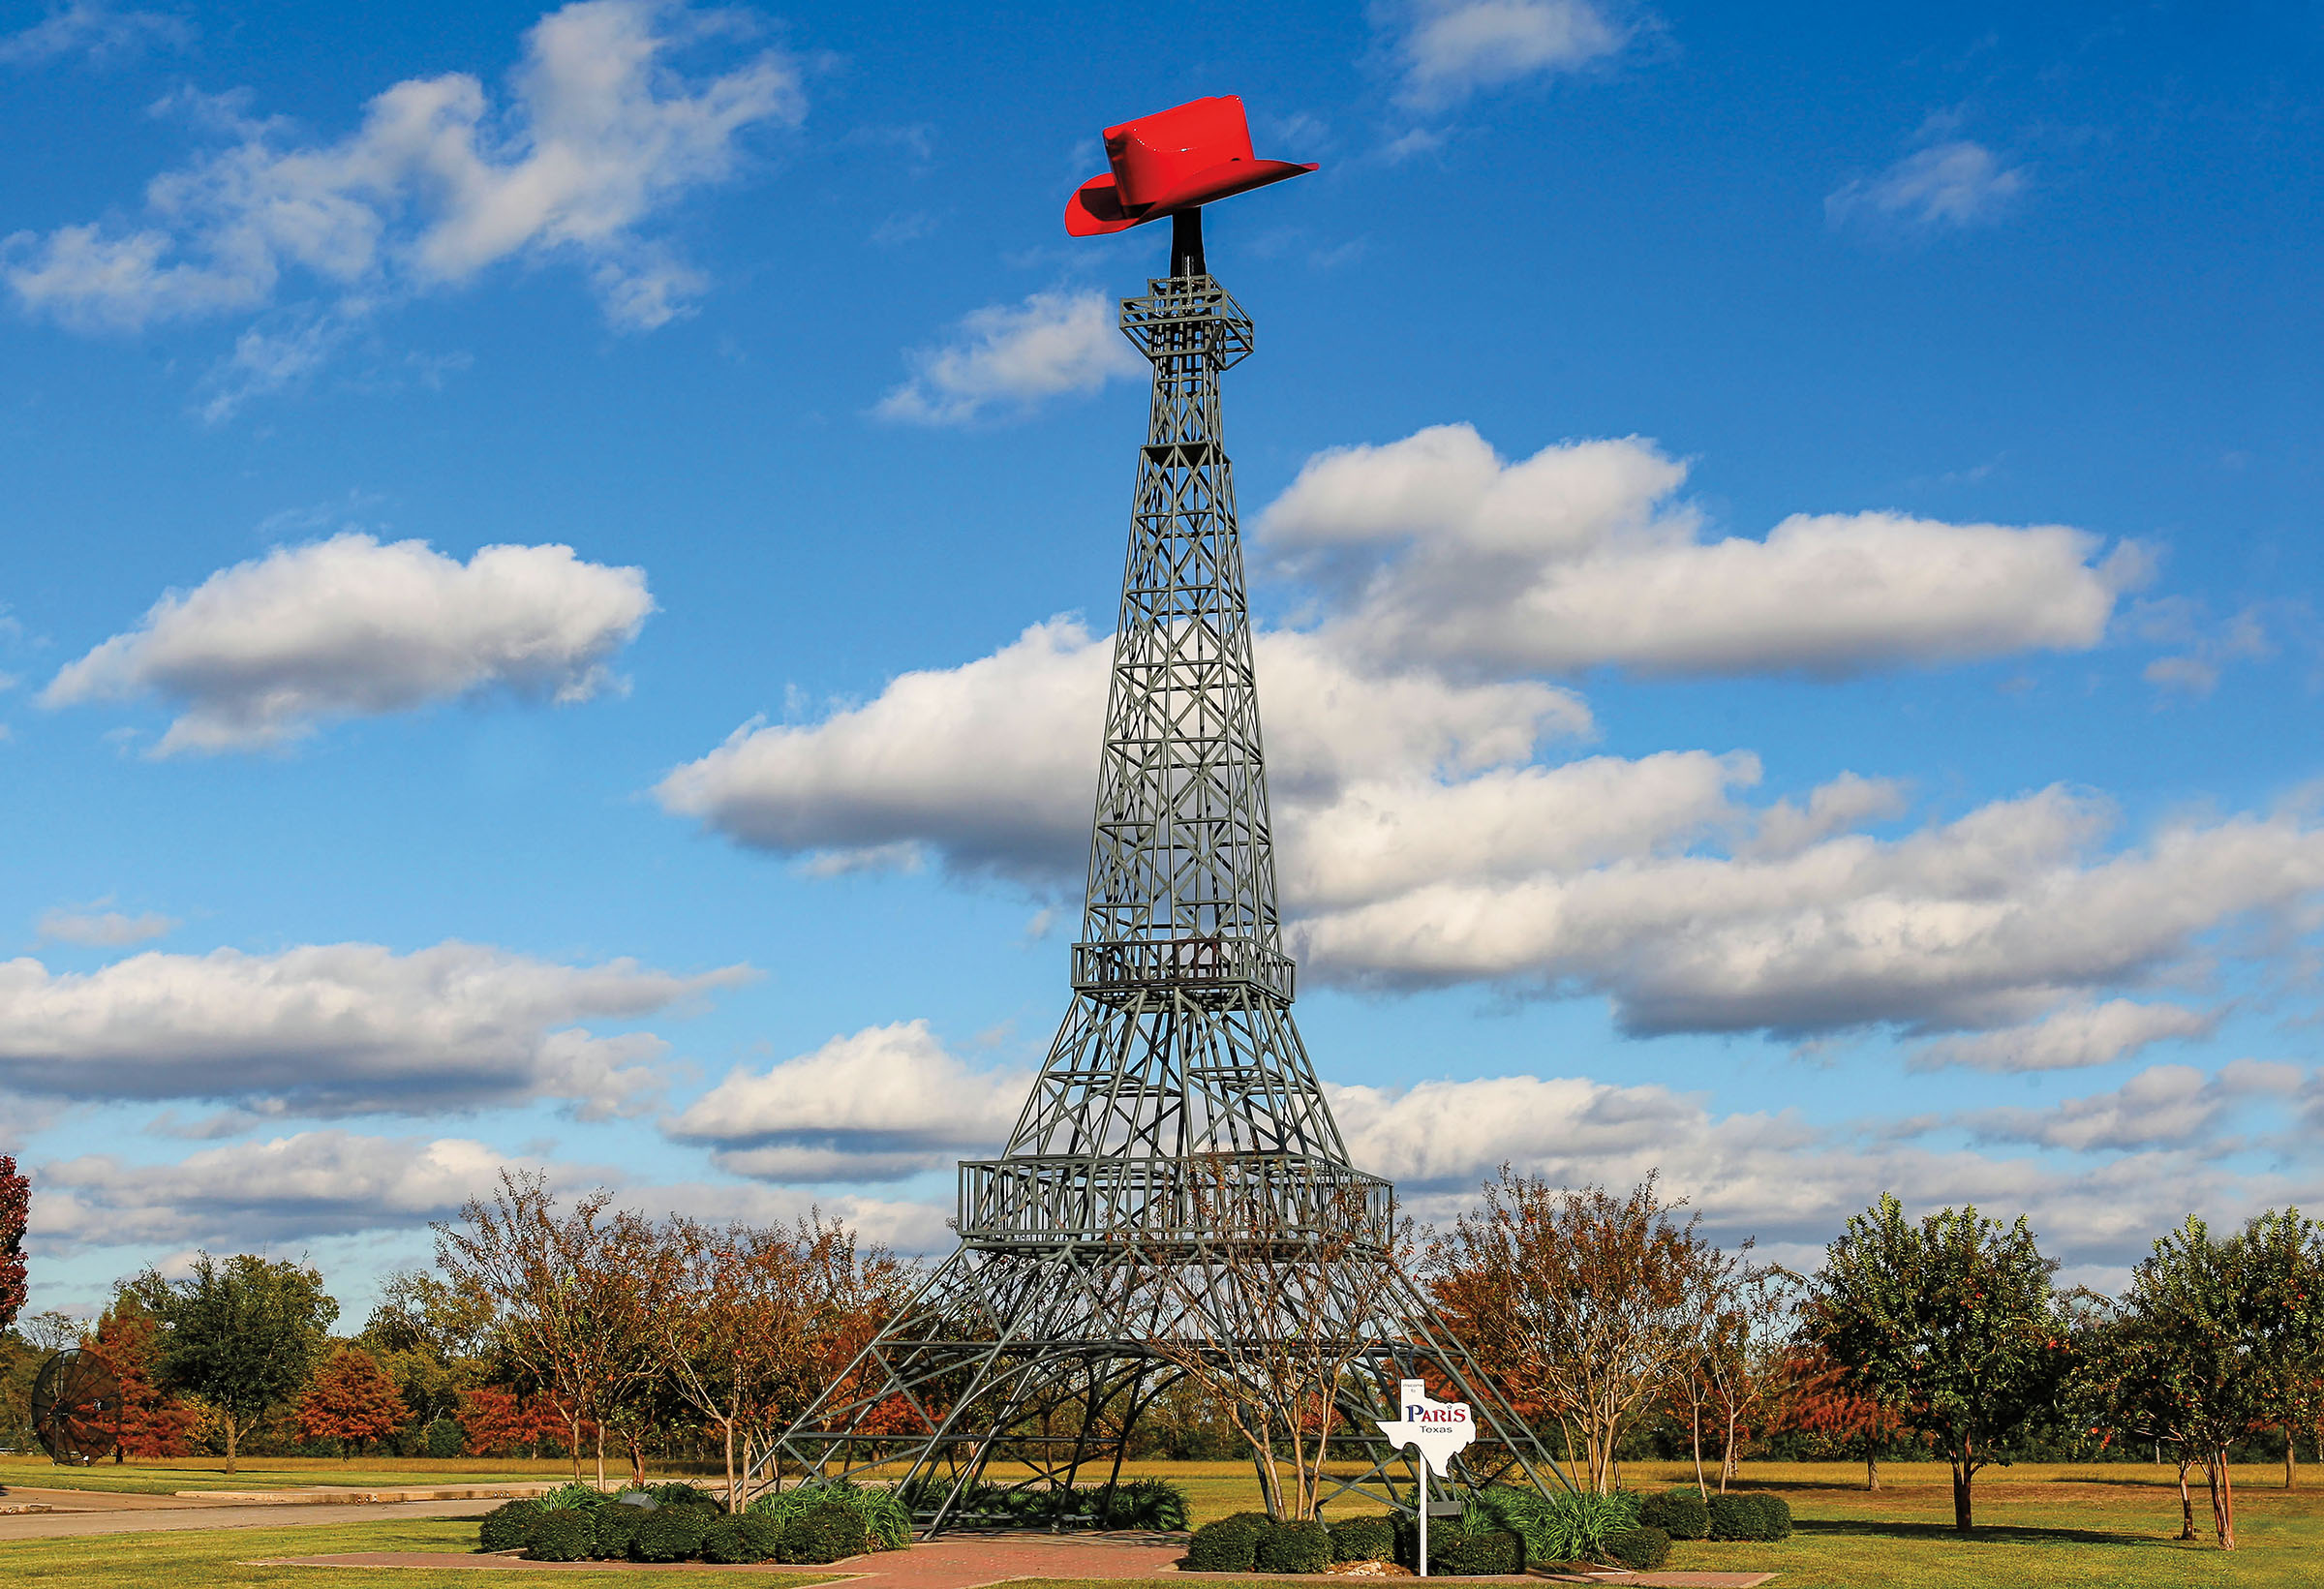 A replica Eiffel tower with a small red cowboy hat